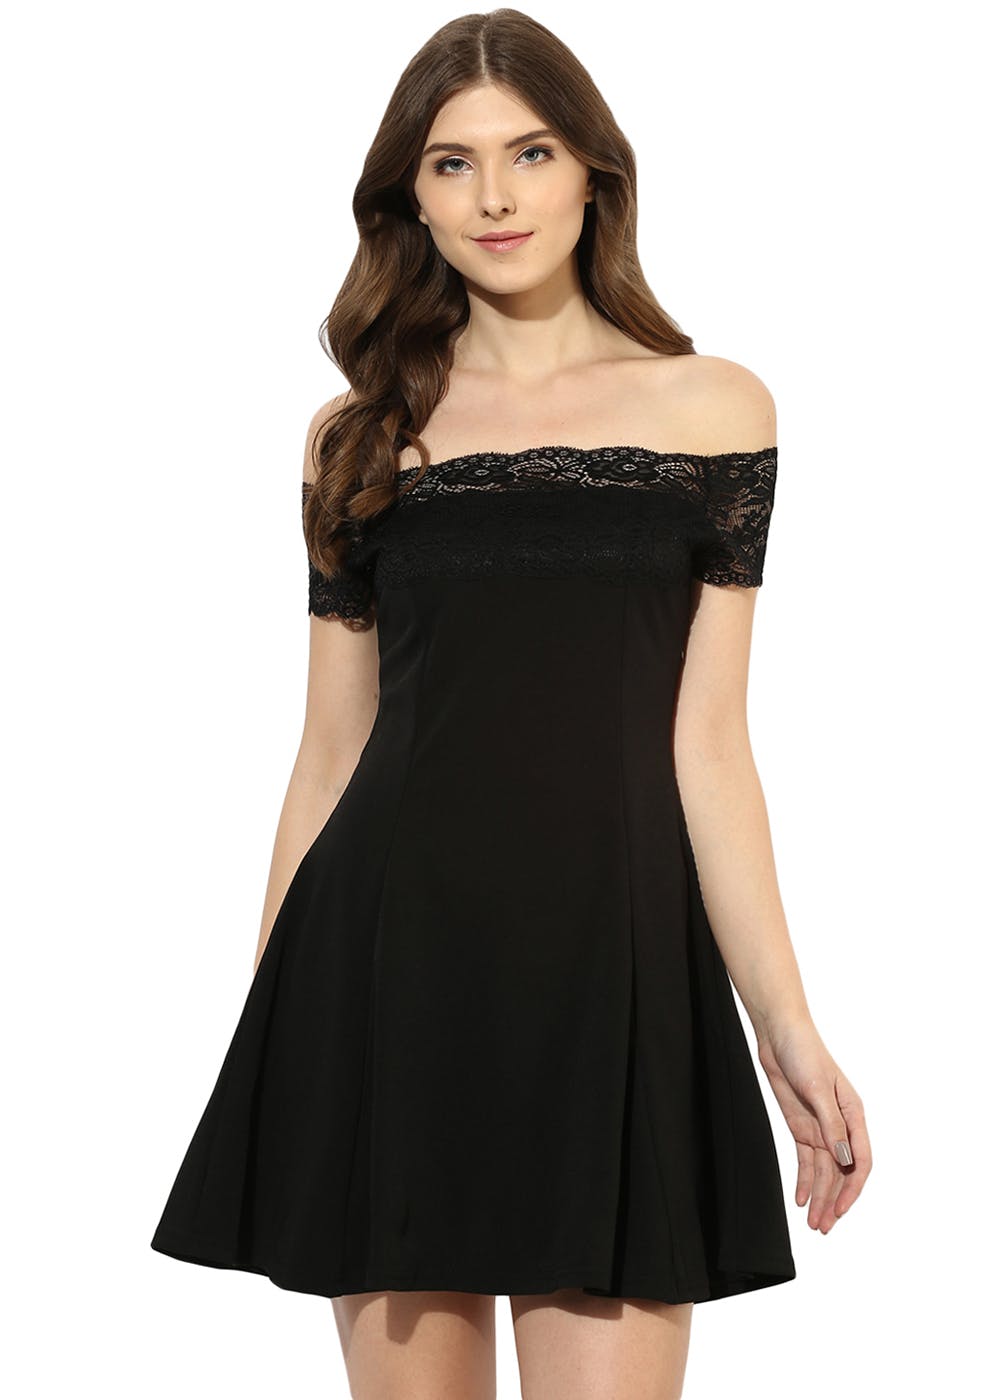 Long Skirts, a-Line + Pencil Skirts for Women, Georgette Black a- Line Dress,  Net Black a- Line One Piece Western Dress Women, Stock Image - Image of  attractive, young: 164444009